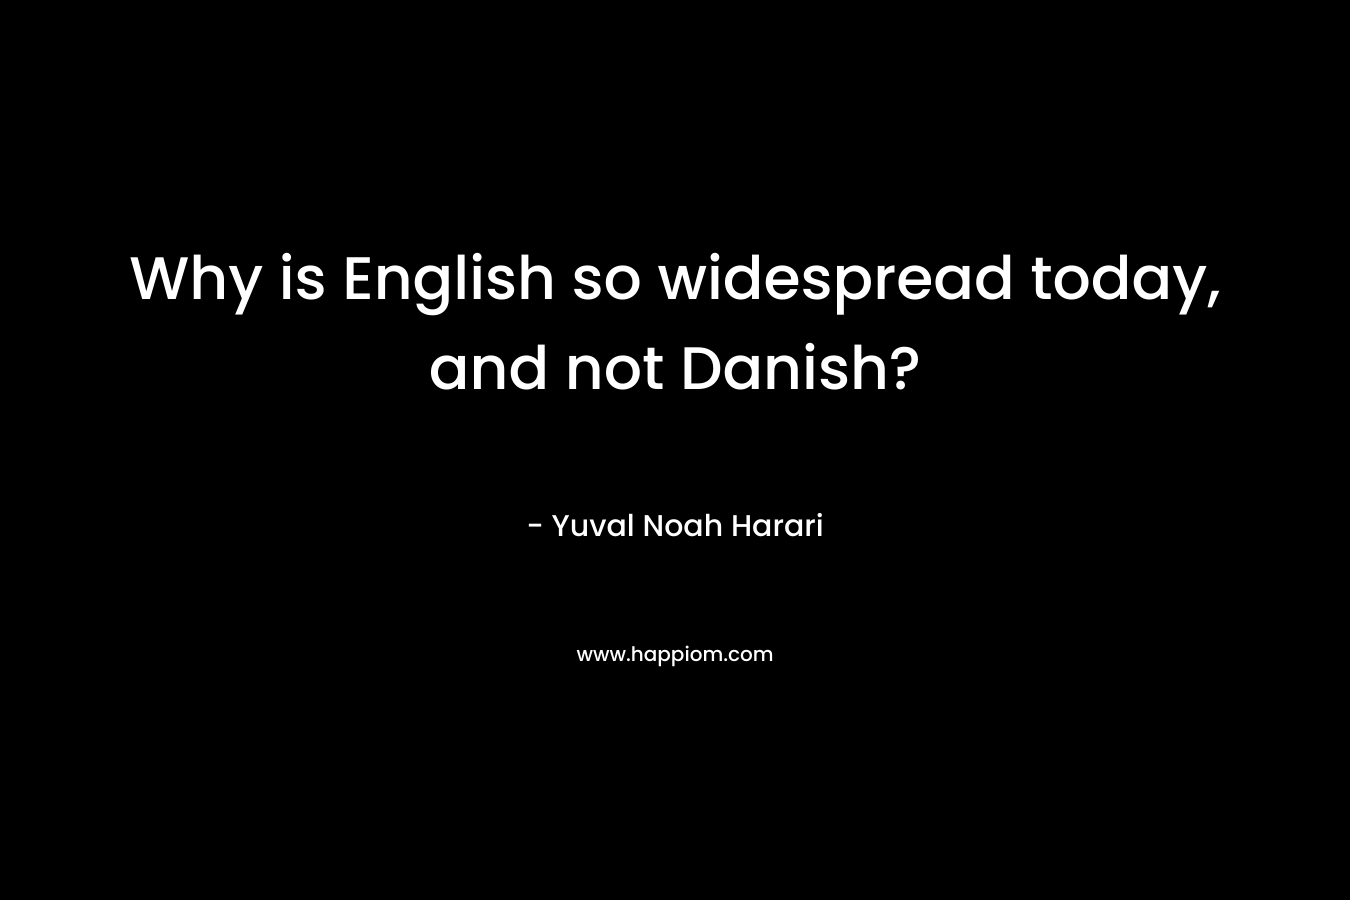 Why is English so widespread today, and not Danish? – Yuval Noah Harari